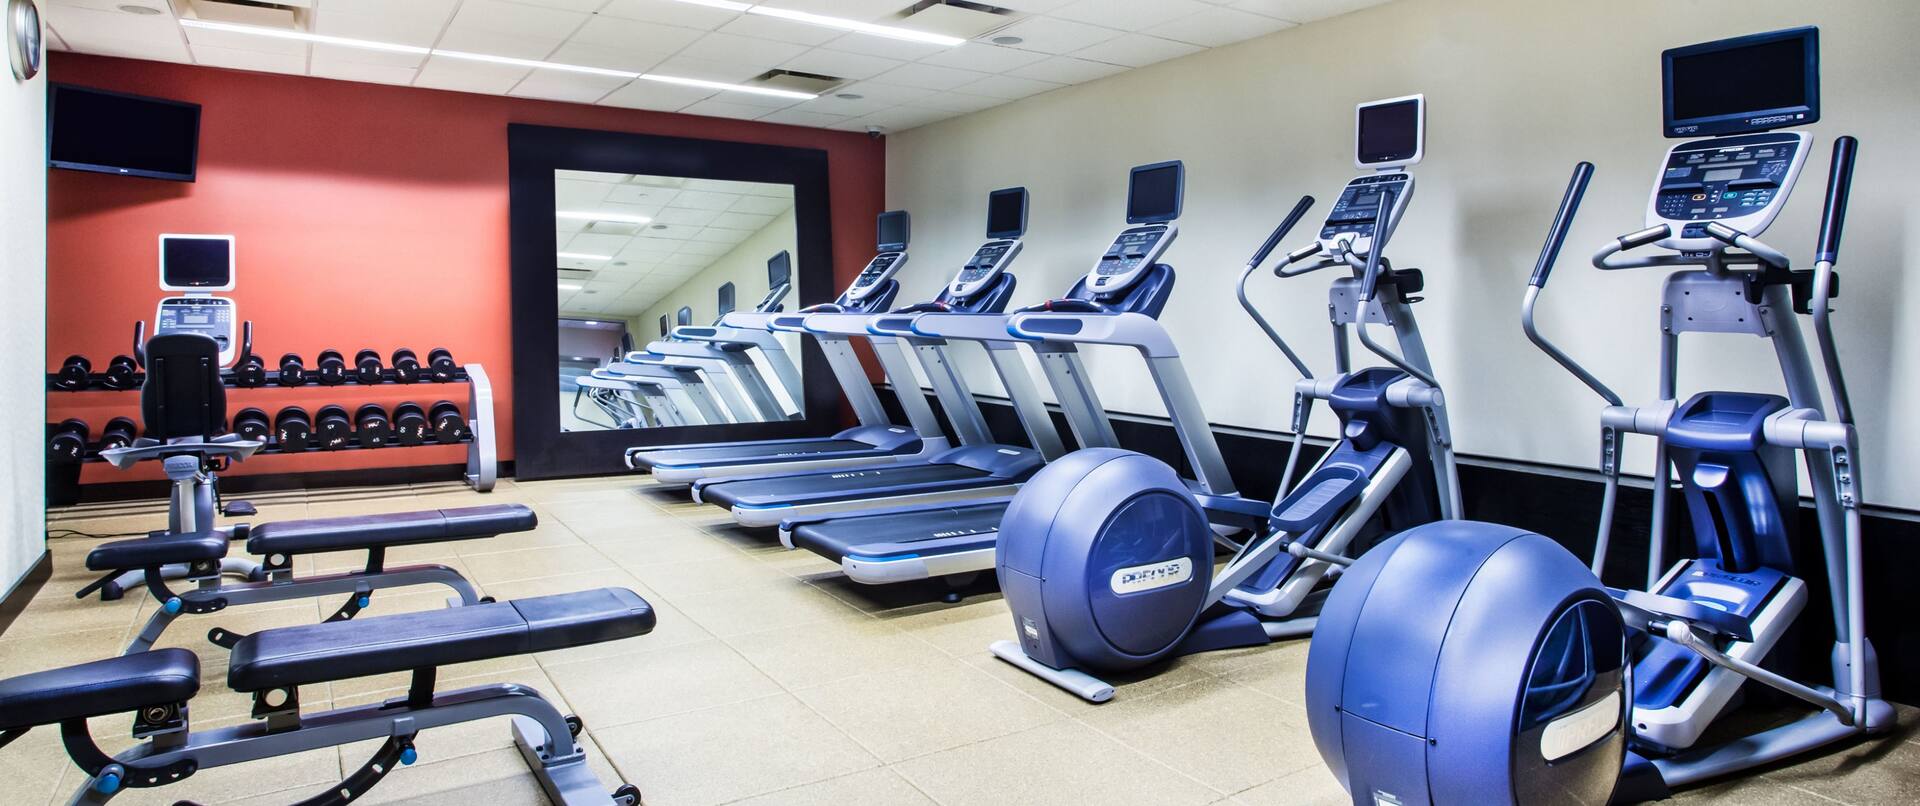 Fitness Center Treadmills, Cross-Trainers, Weight Benches and Free Weights Rack